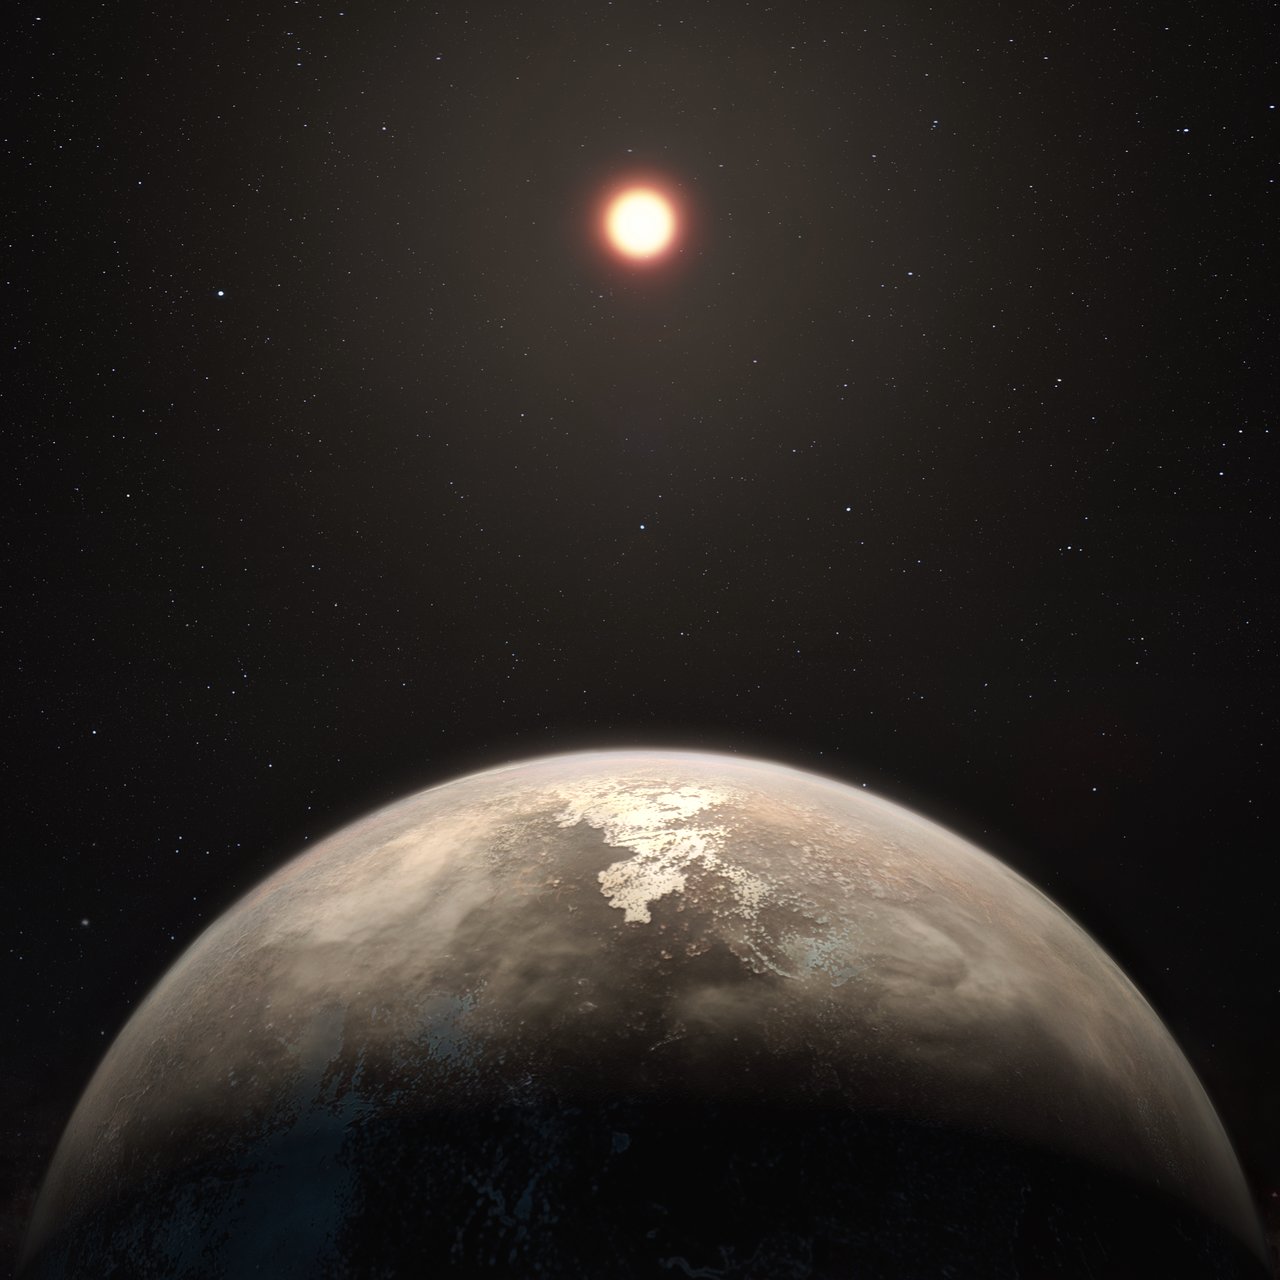 Closest Temperate World Orbiting Quiet Star Discovered